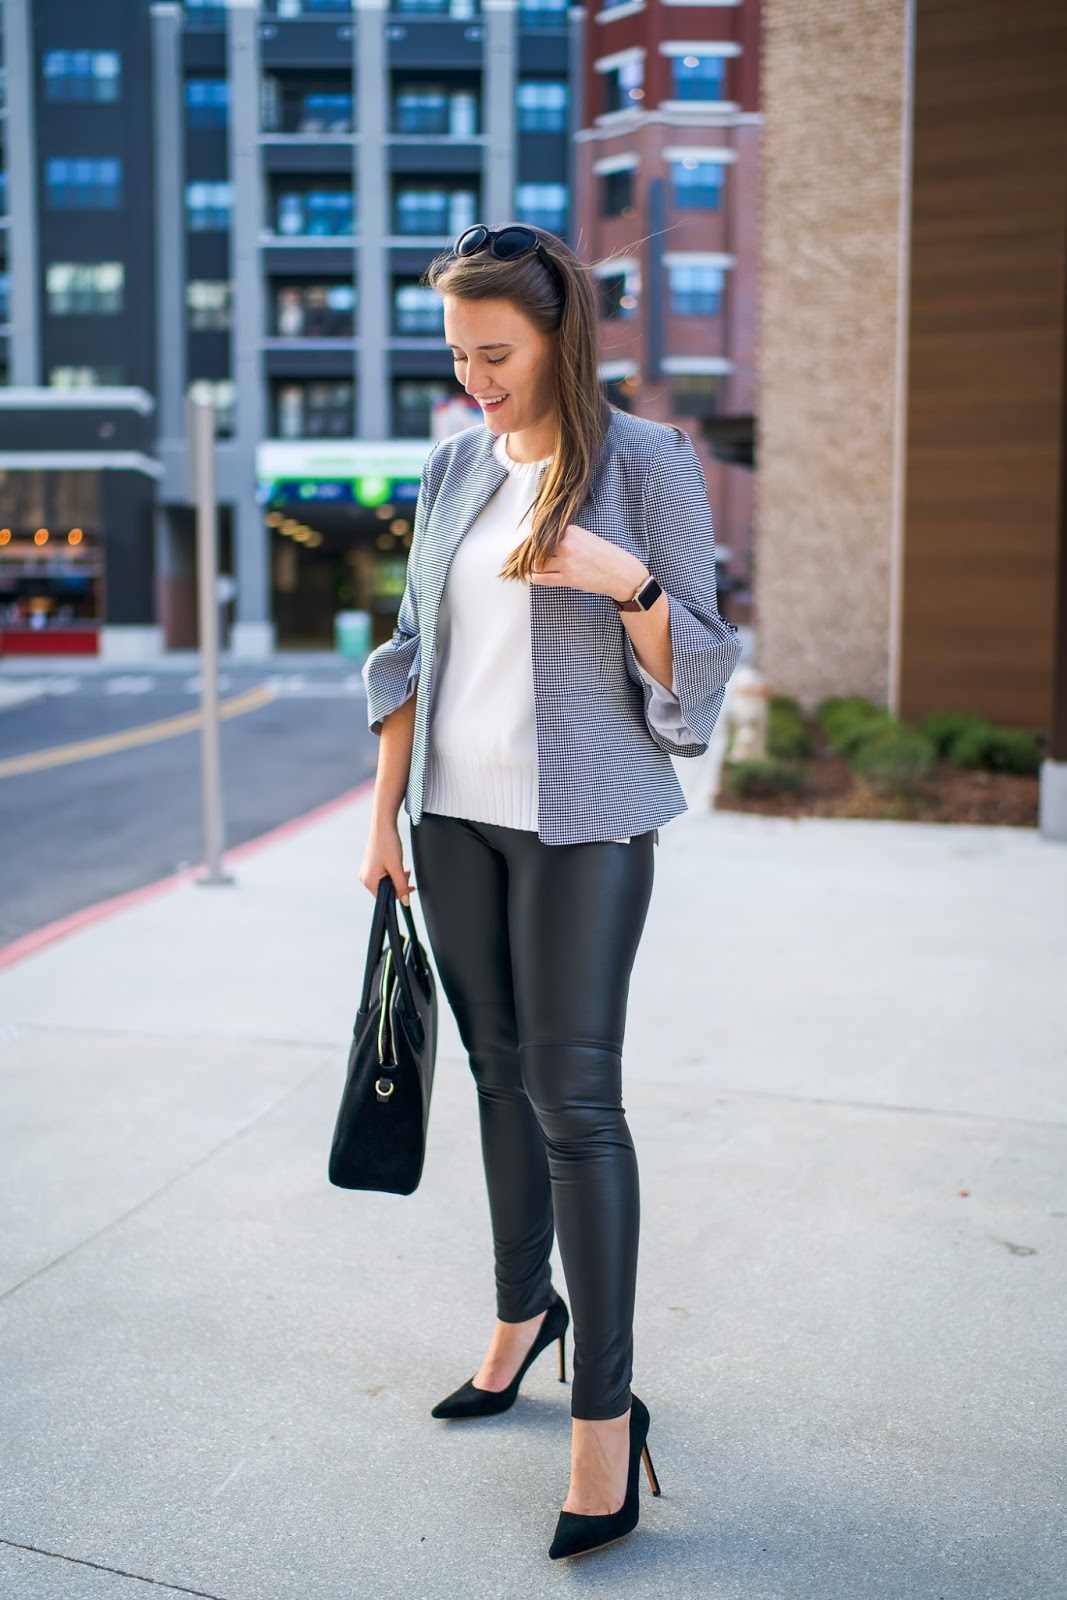 How to Wear Leather Leggings to Work | New York City Fashion and ...